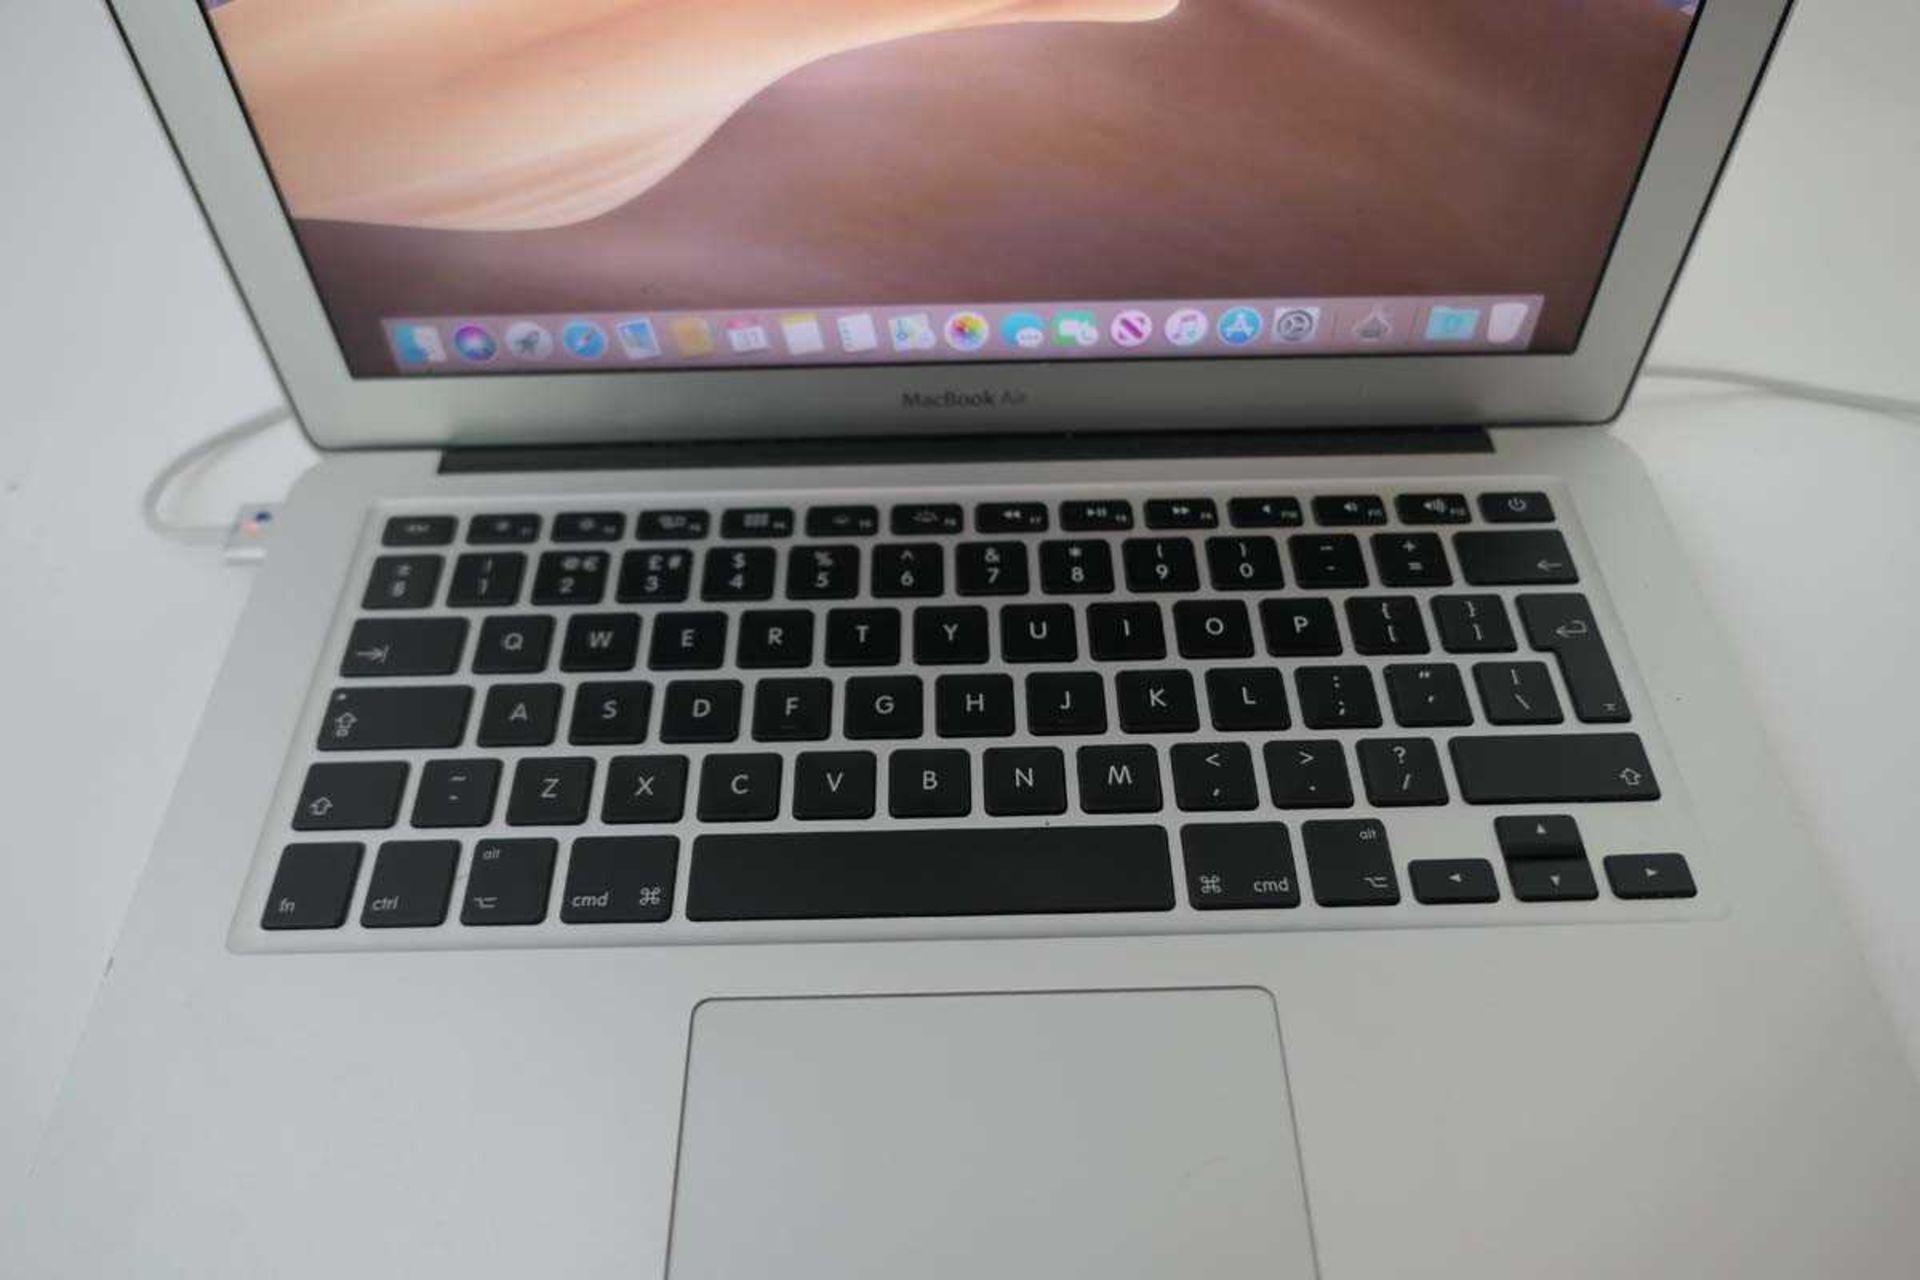 +VAT MacBook 13" Air 2015 A1466 Silver laptop with Intel i5 - 1.6GHz, 8GB RAM and 128GB SSD (has - Image 4 of 4